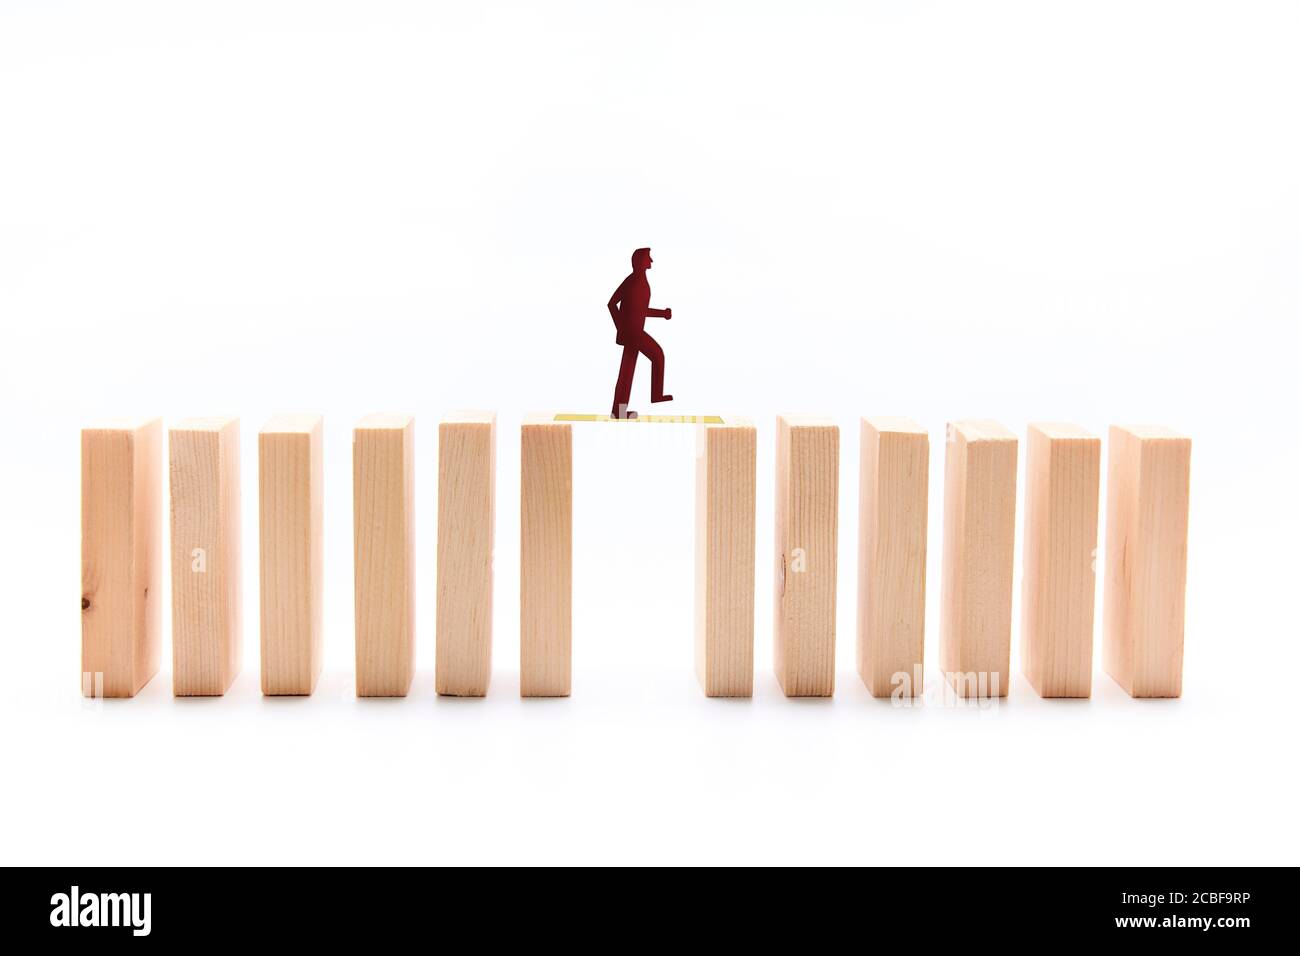 Silhouette of a person passing over wooden tiles. Concept of business support, collaboration Stock Photo